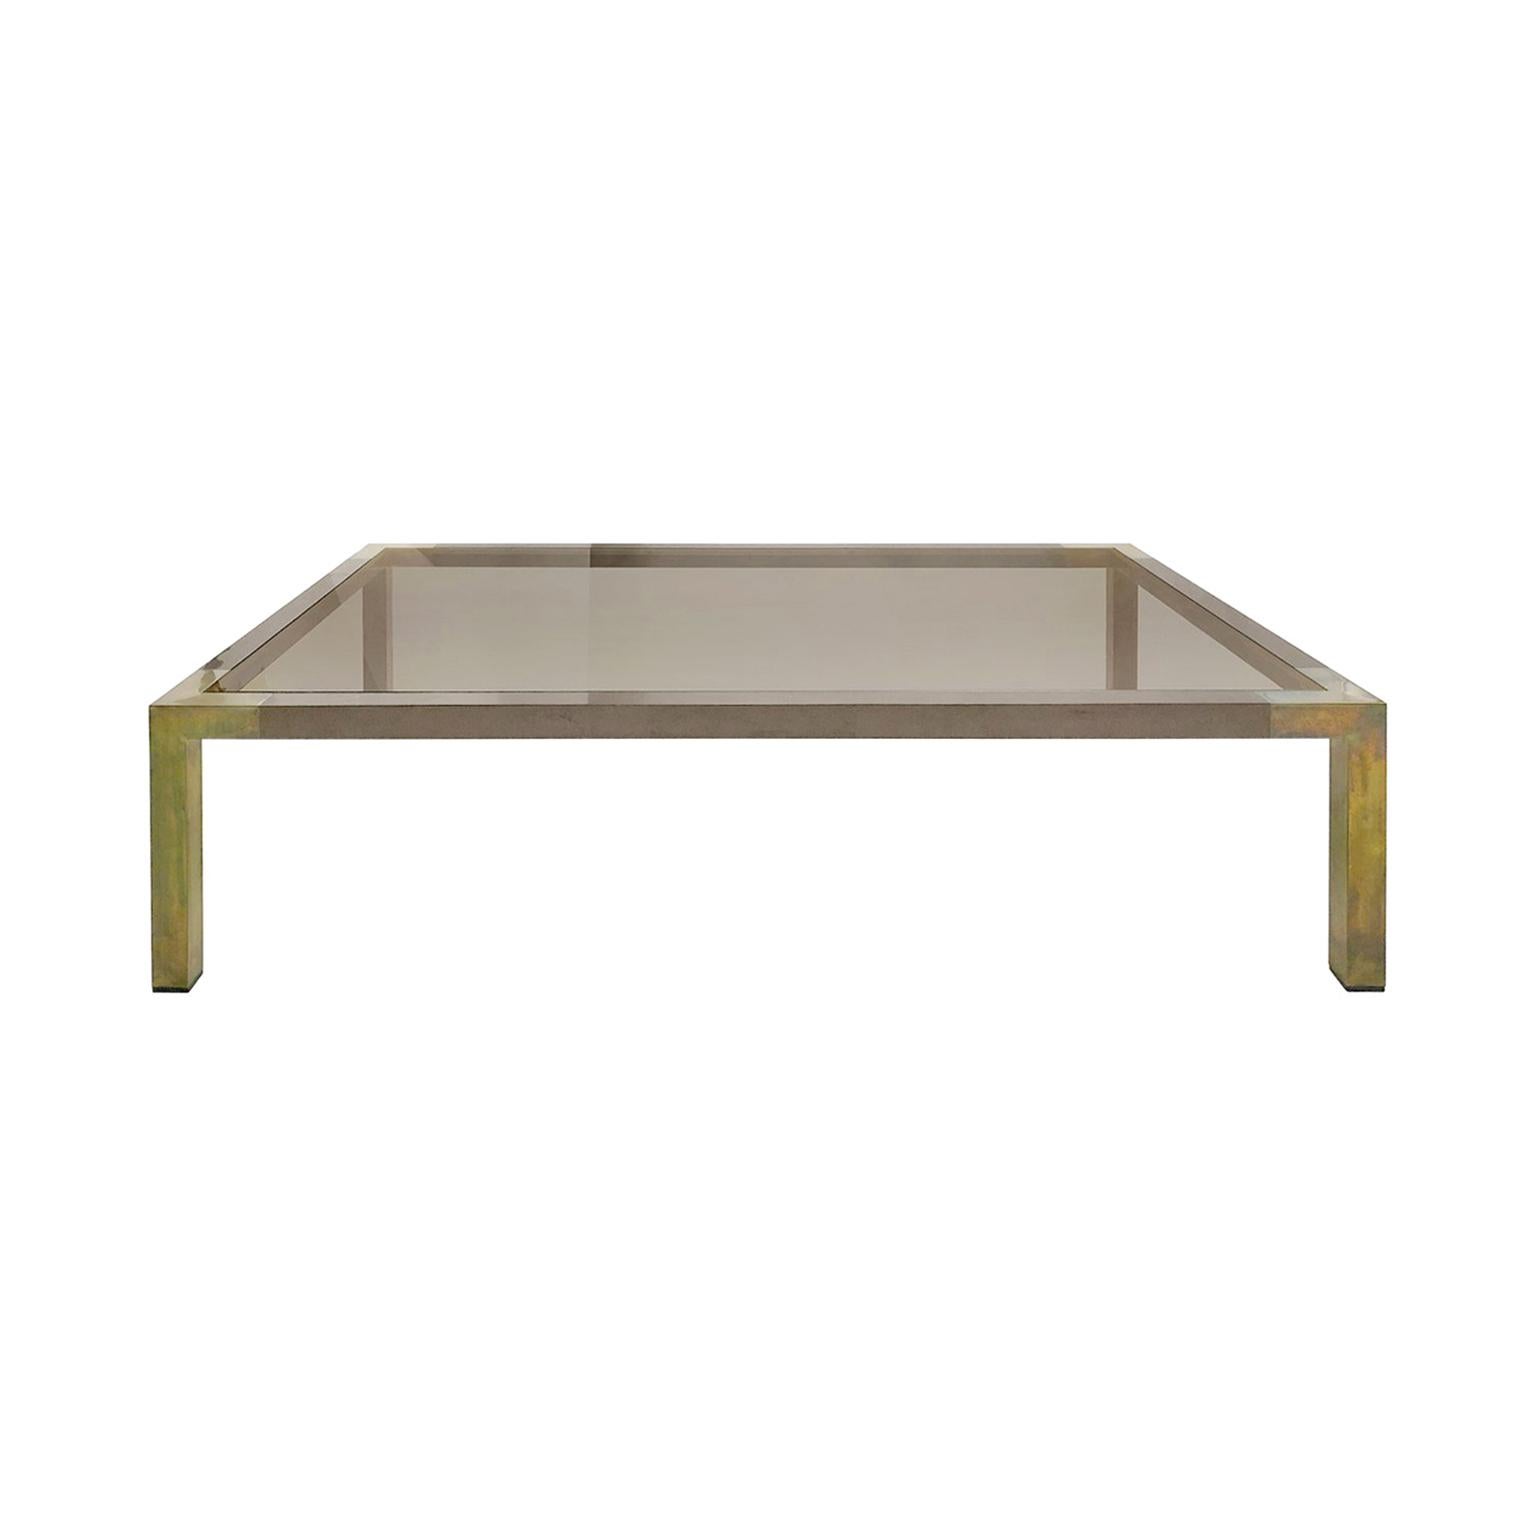 1970s French Rectangular Two-Tone Bronze Coffee Table by Willy Rizzo For Sale